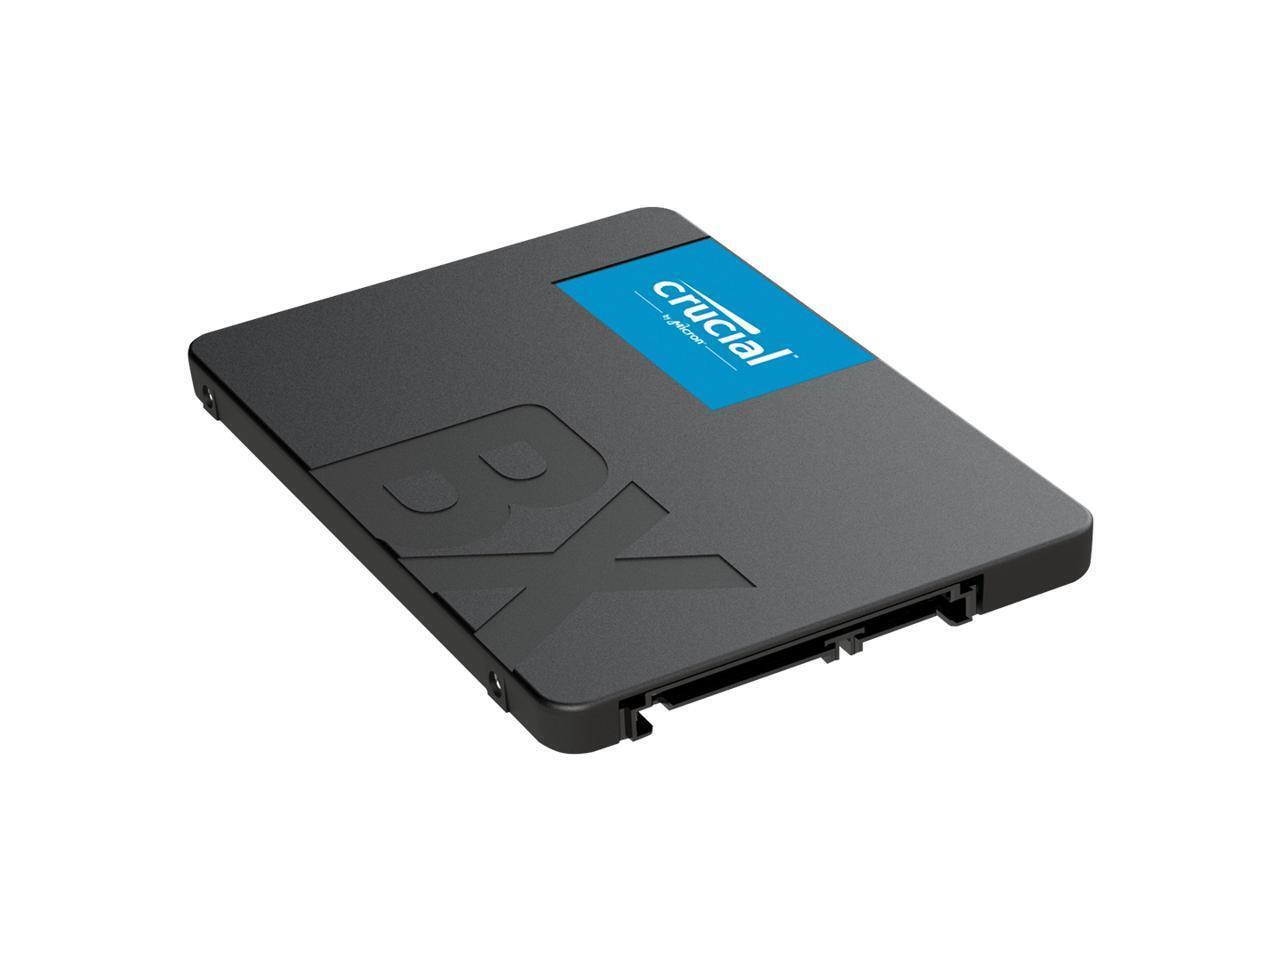 Crucial BX500 2TB 3D NAND SATA 2.5-Inch Internal SSD, up to 540 MB/s -